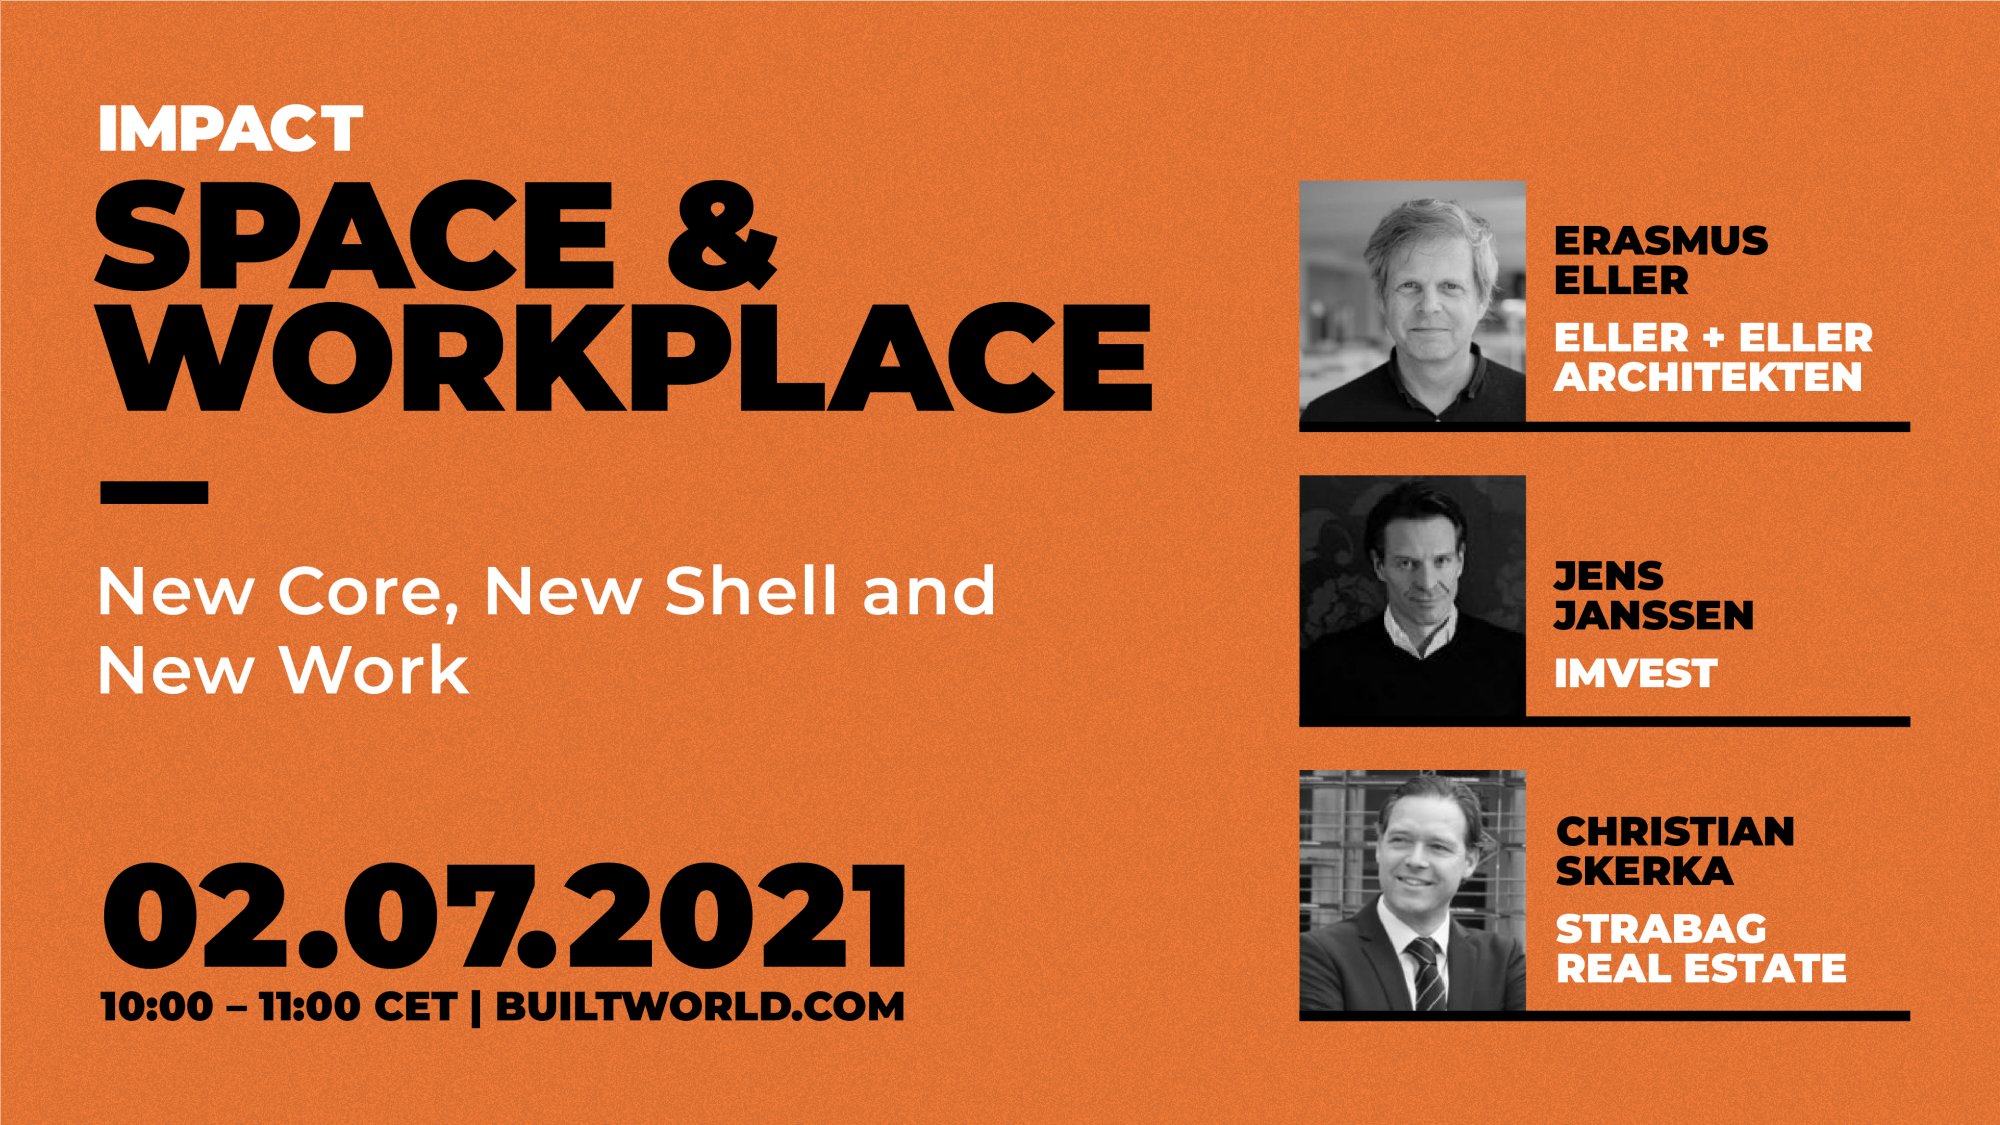 new-core-new-shell-new-work-office-standards-mit-gebaeudetiefen